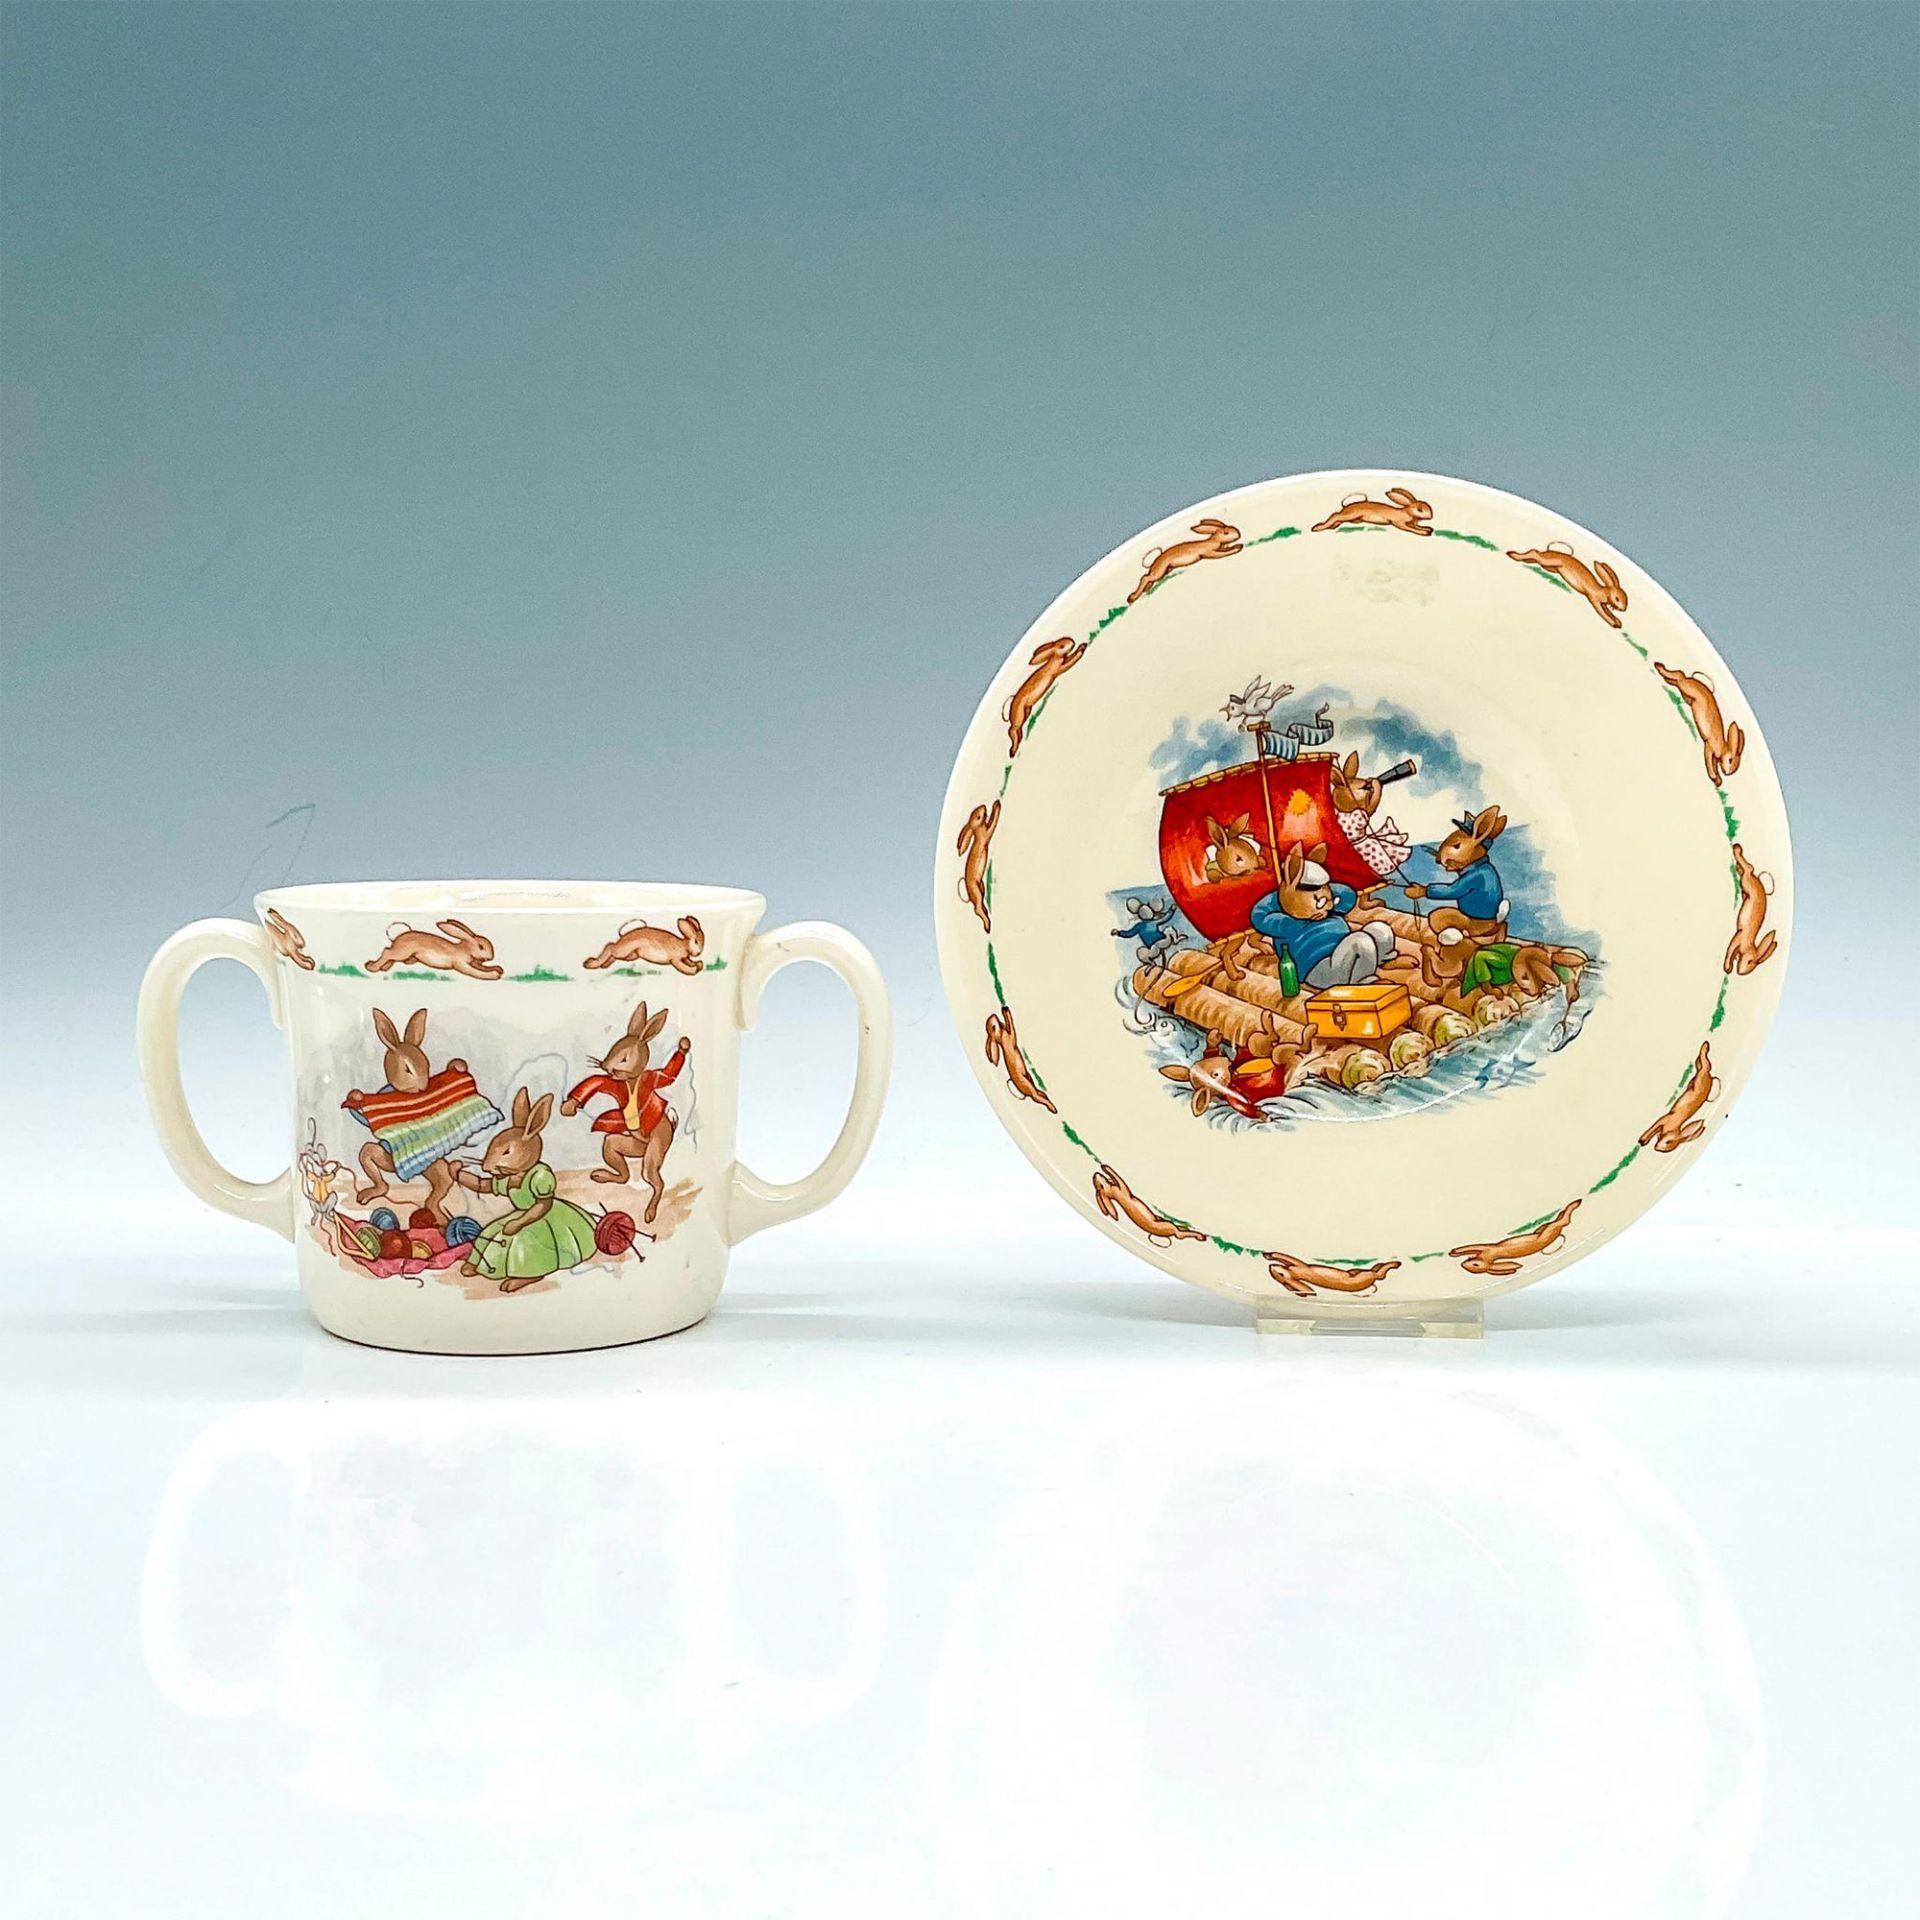 2pc Royal Doulton Bunnykins Children Cup and Bowl Set